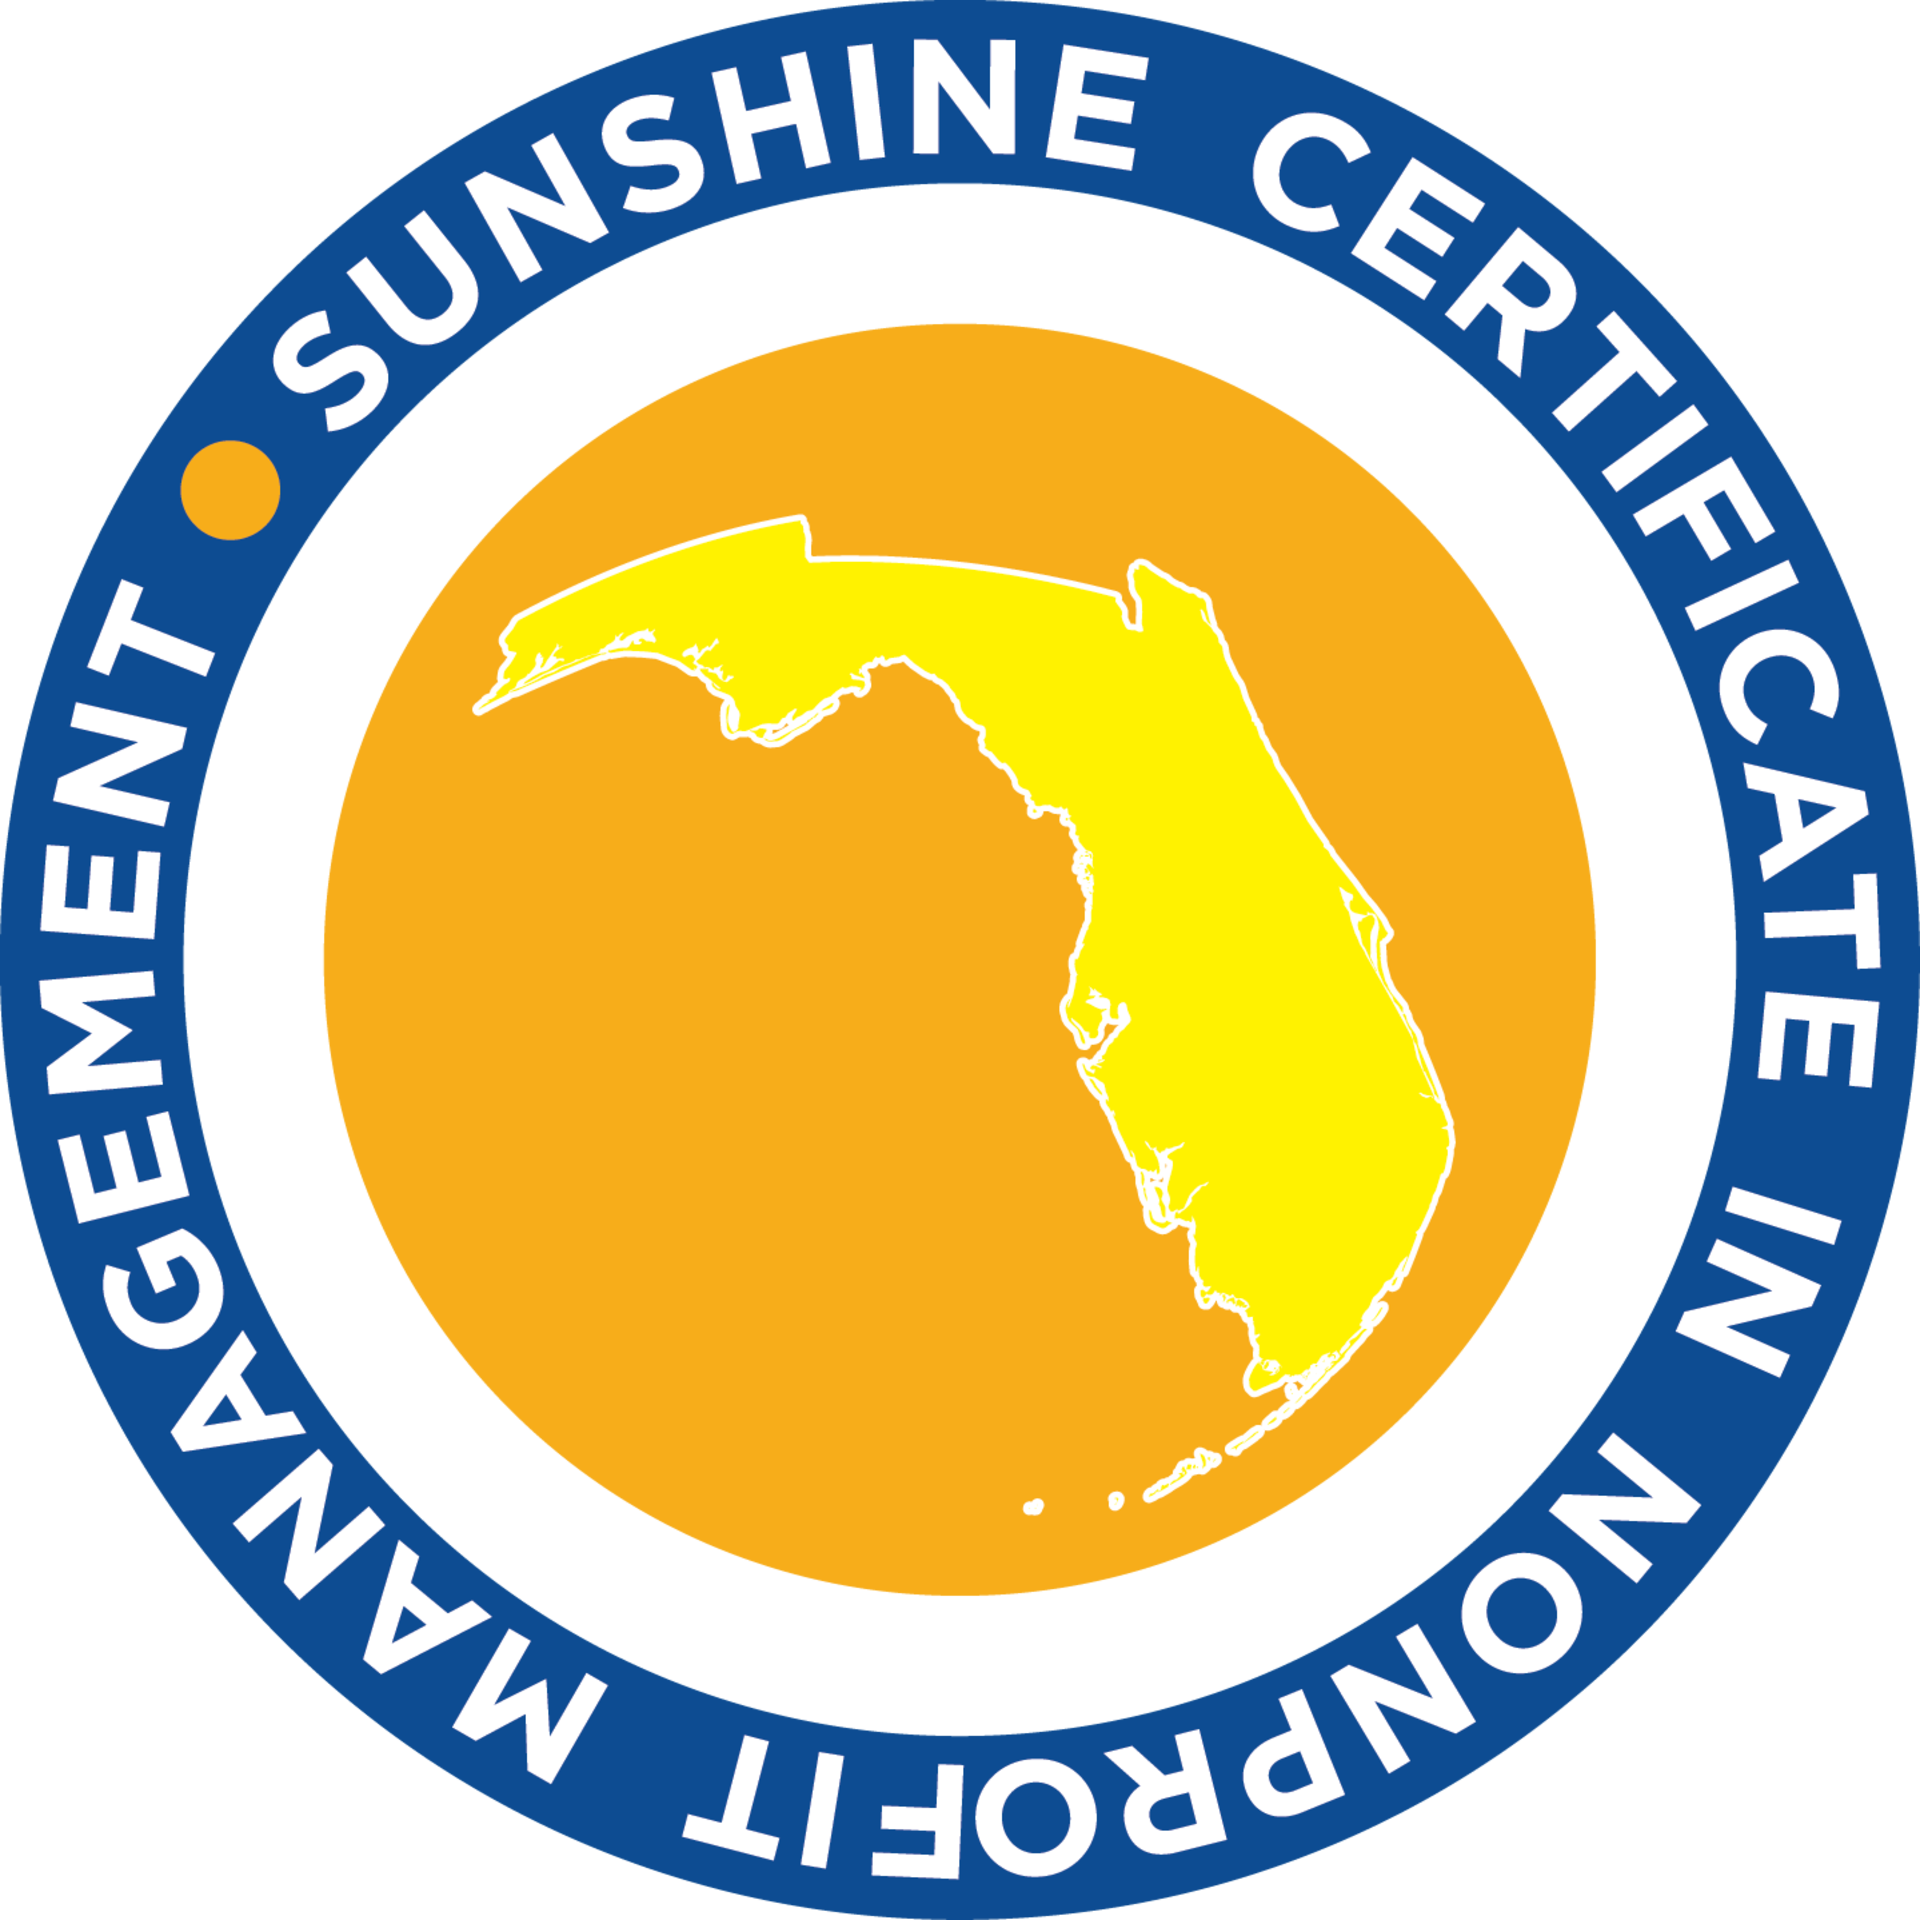  Florida Nonprofits’ Leadership: Governance Class of the Sunshine Certificate in.....